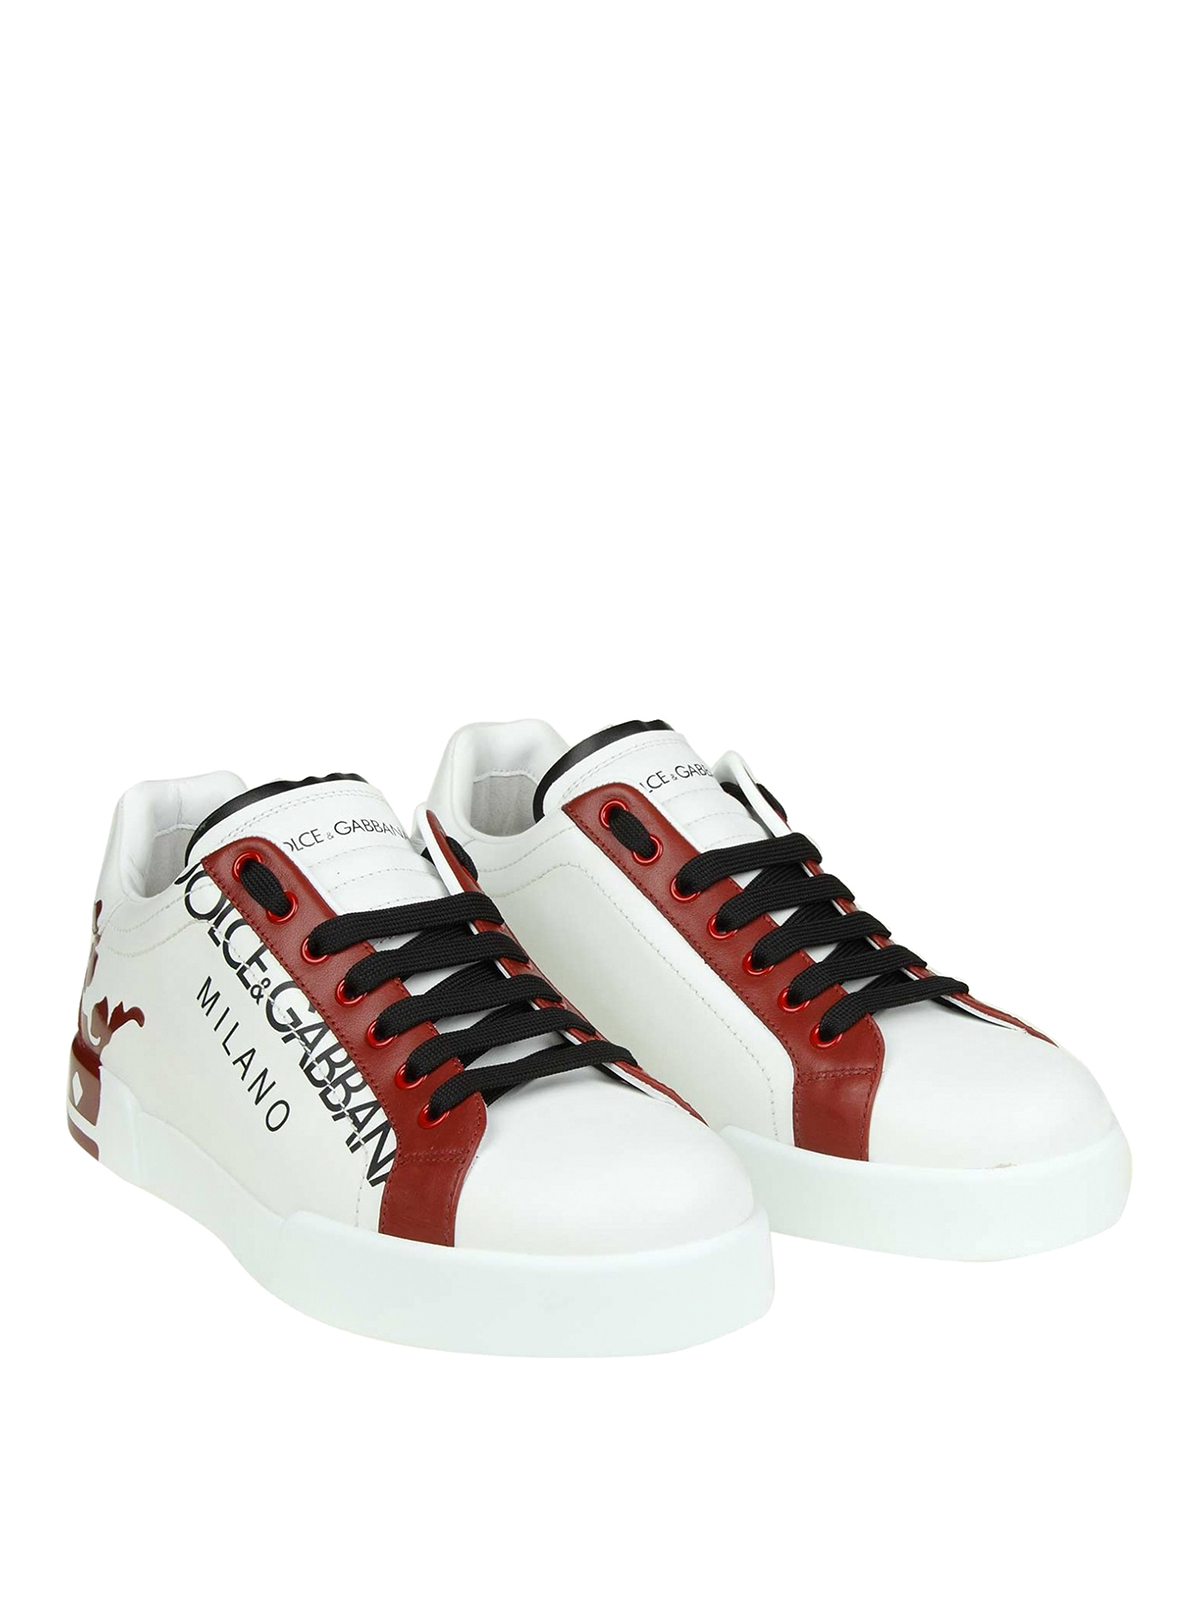 dolce and gabbana red trainers